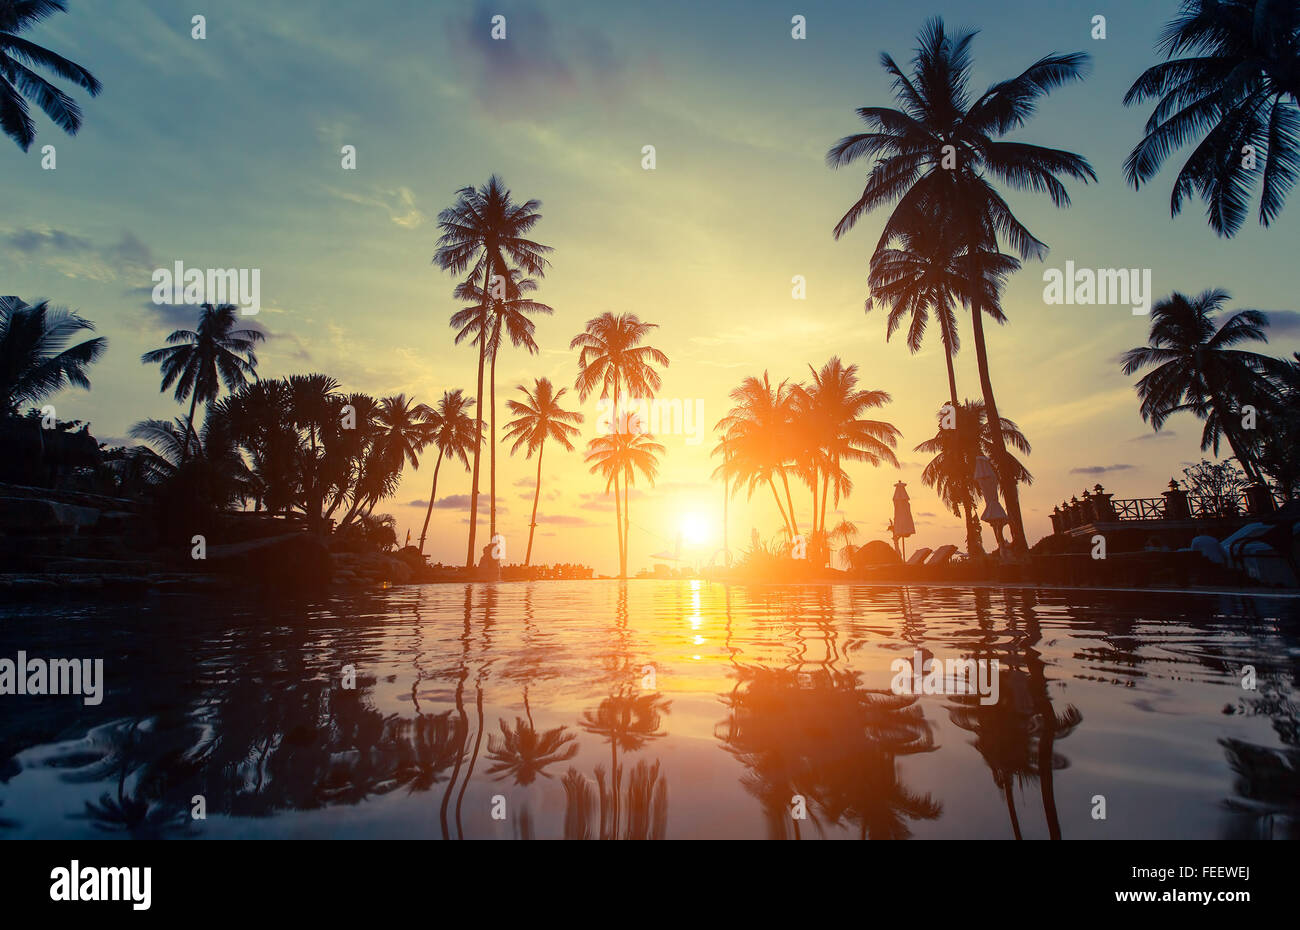 Palm trees silhouette at amazing sunset on the beach in the Thailand tropics. Stock Photo